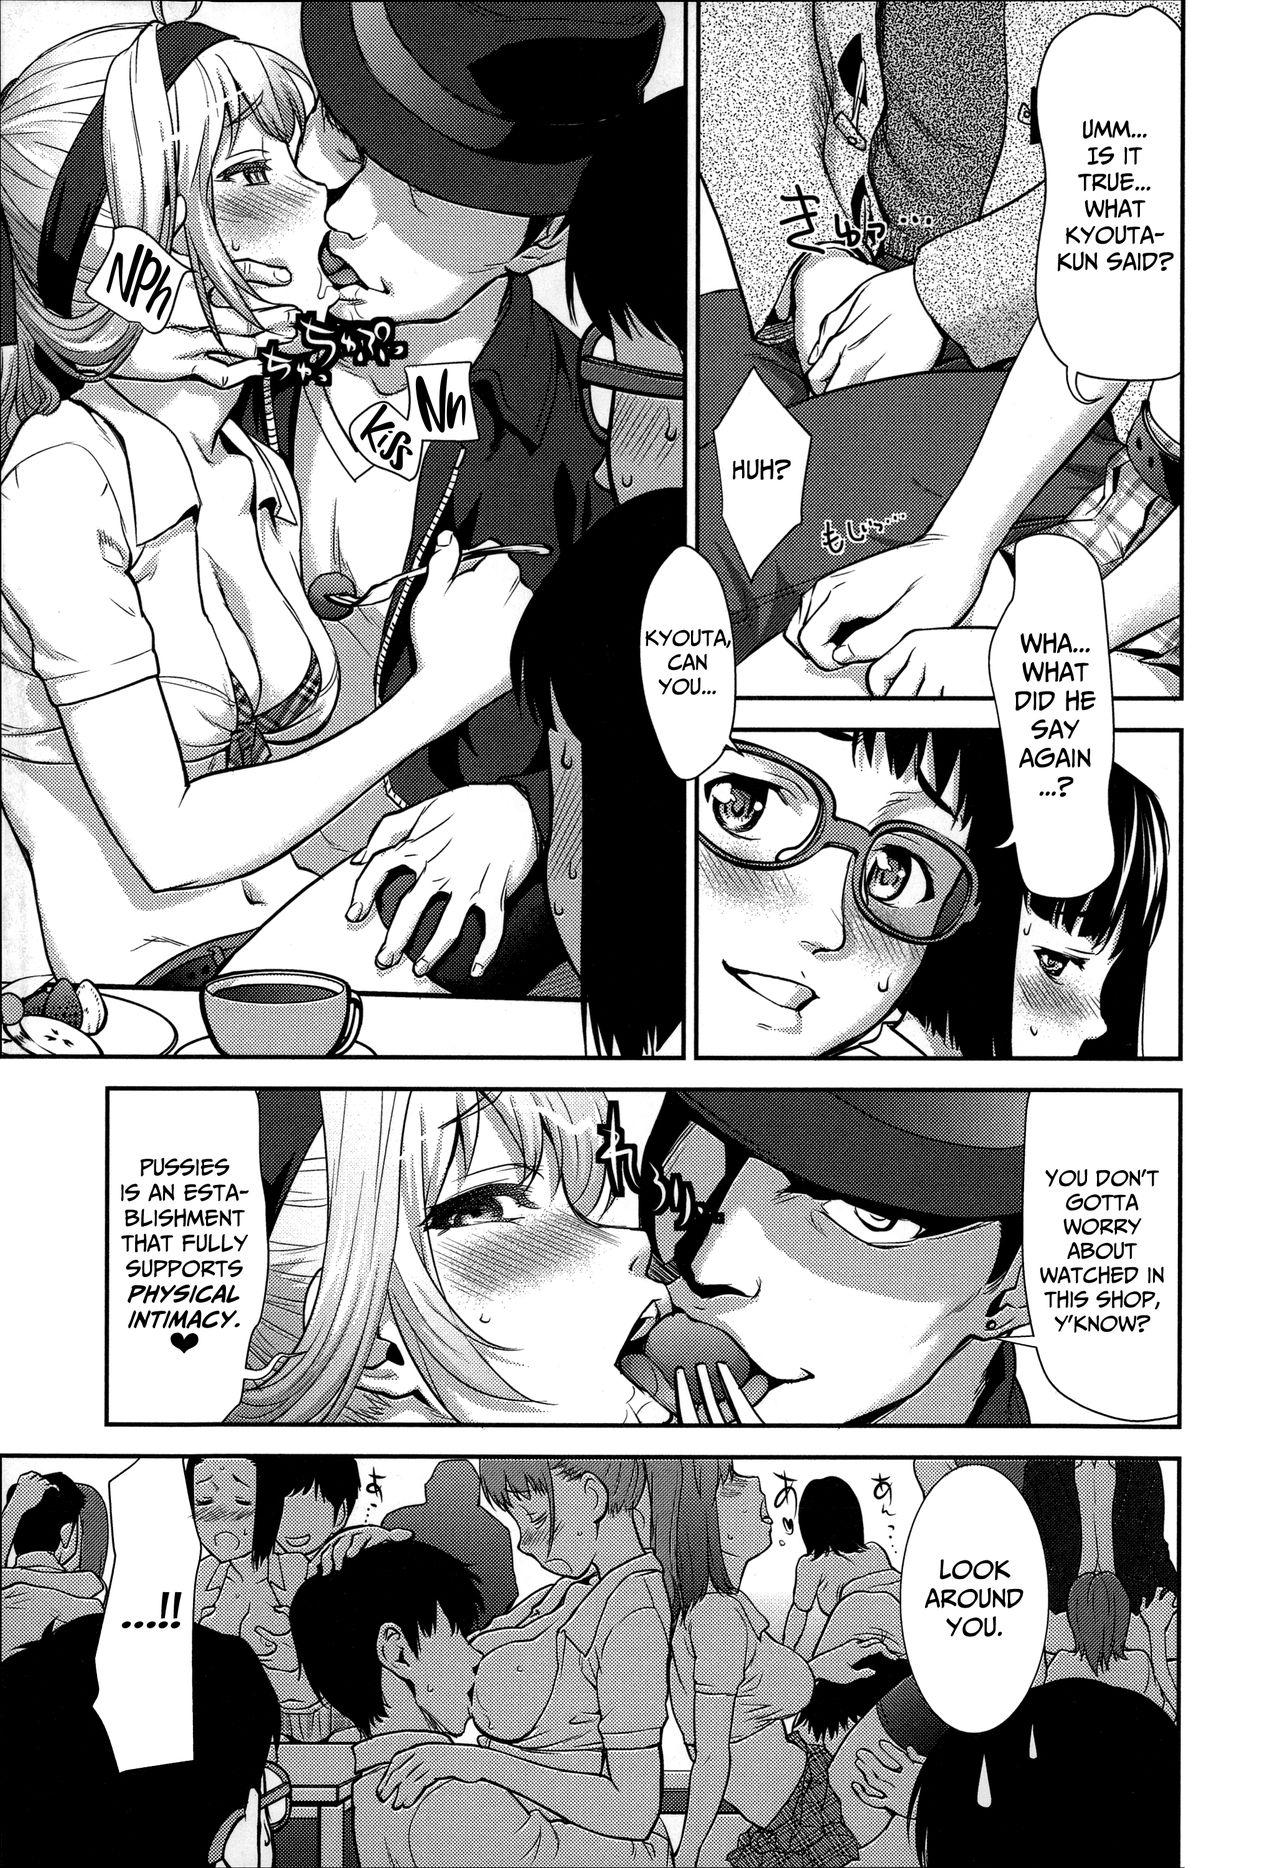 Girl On Girl Pussies e Youkoso! | Welcome to Pussies! Banging - Page 7